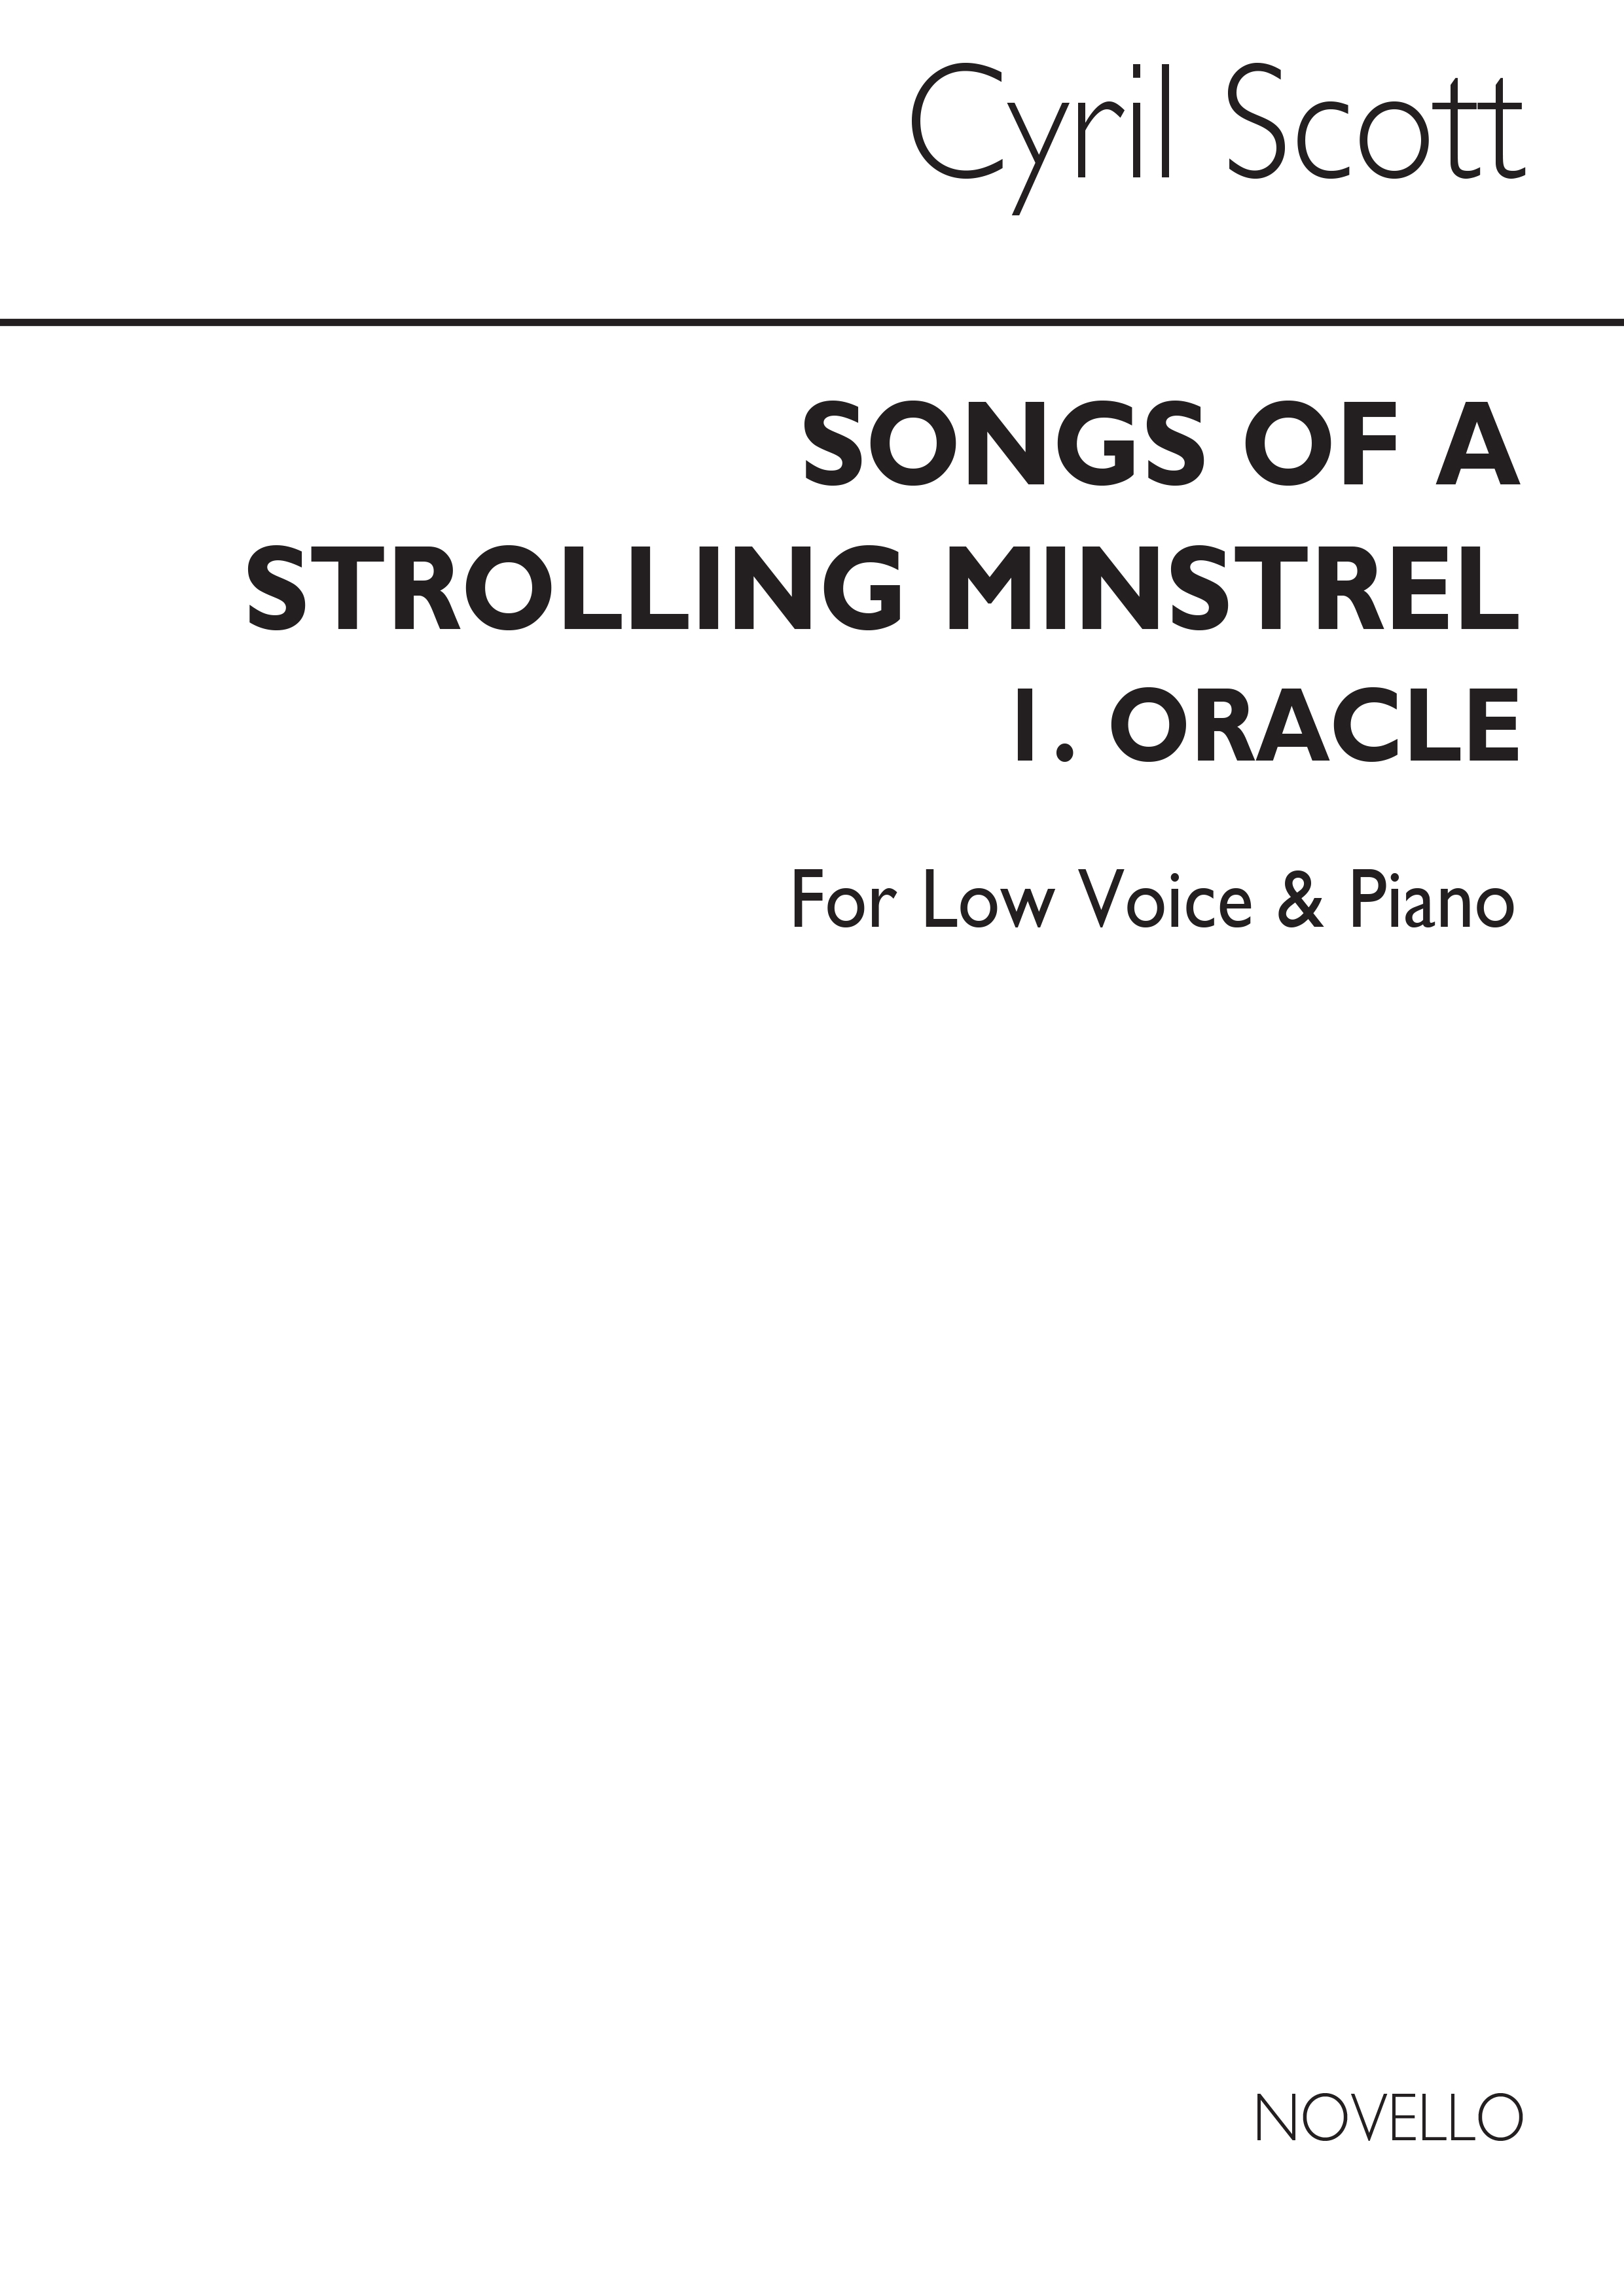 Cyril Scott: Oracle (Songs Of A Strolling Minstrel): Low Voice: Vocal Work